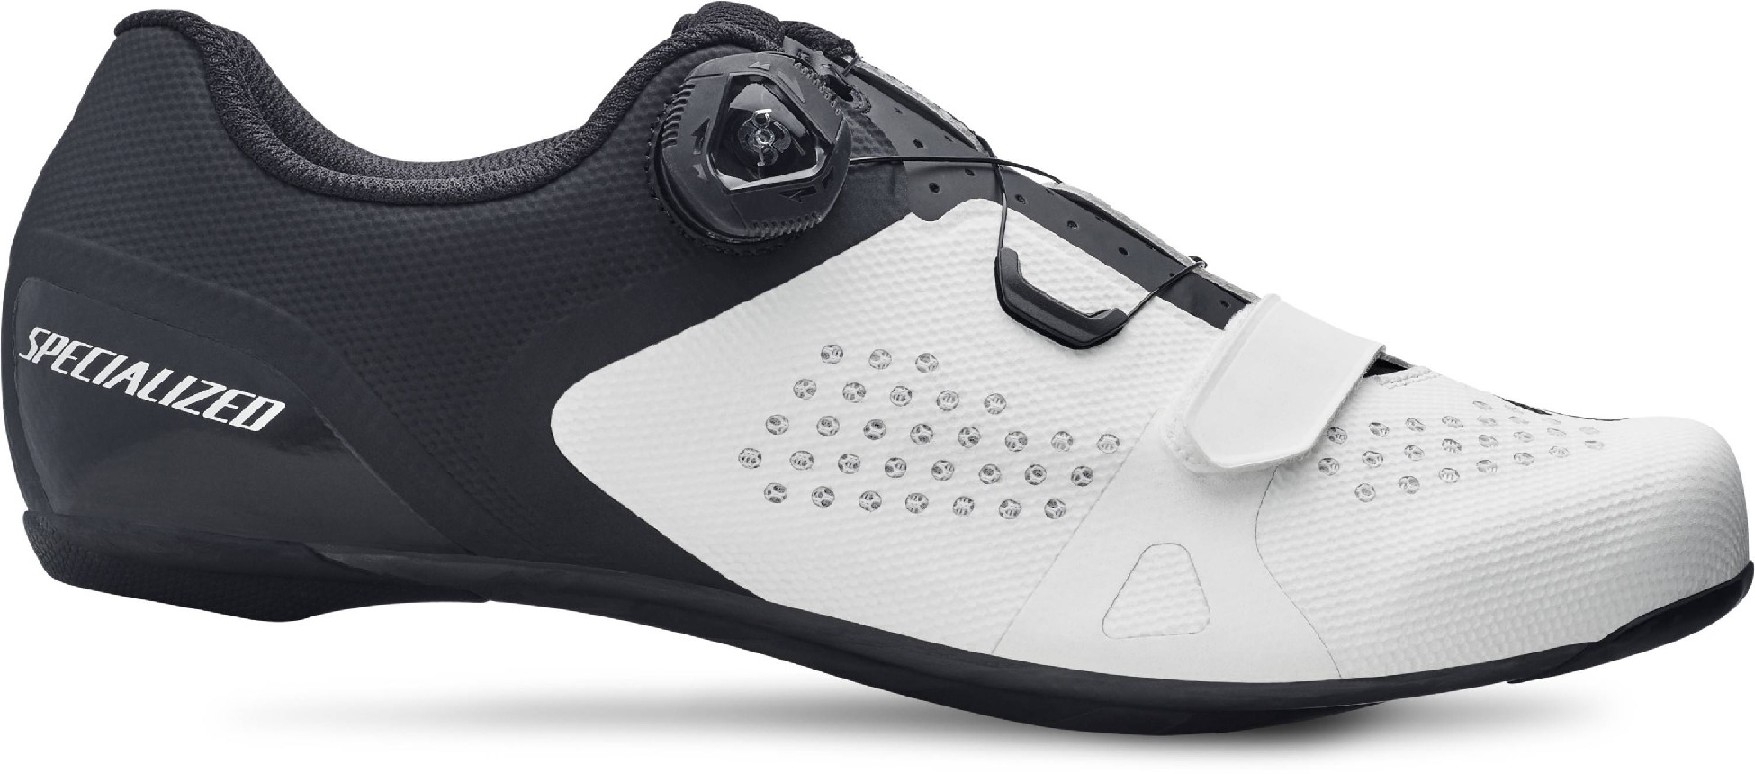 Specialized Torch 2.0 Road Shoes (2021) - Bild 1